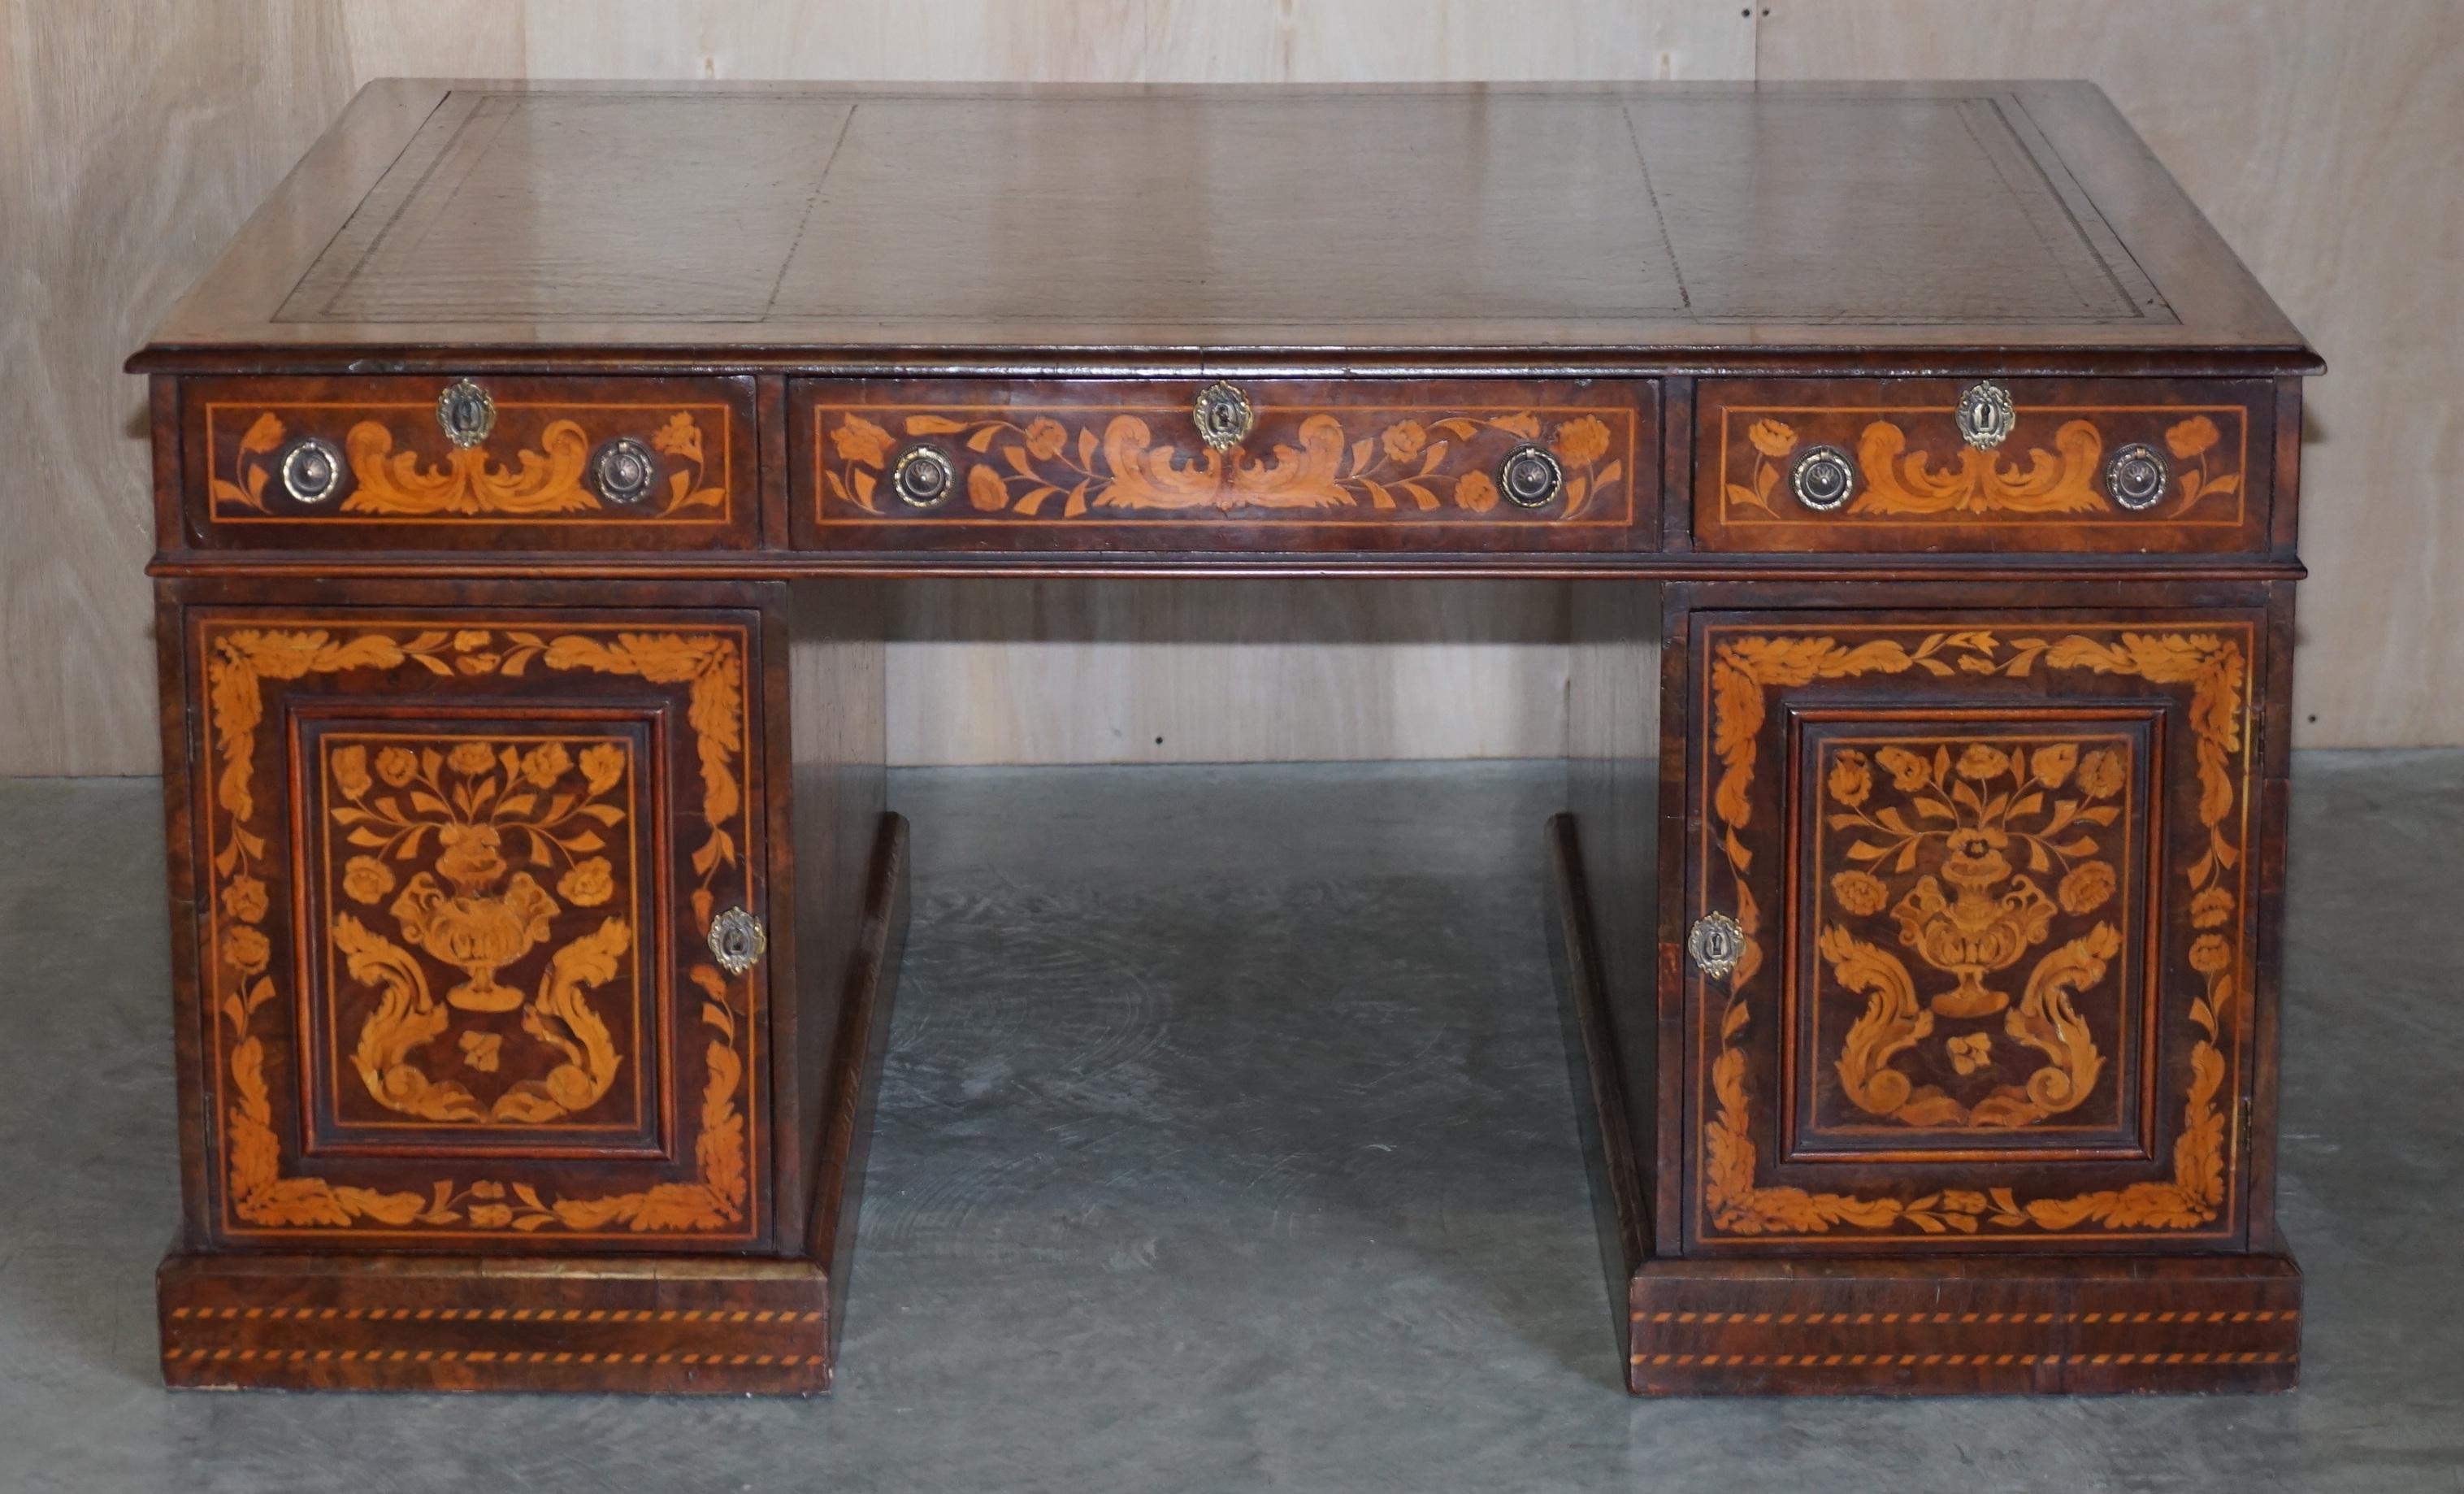 Antique Restored Dutch Marquetry Inlaid Double Sided Twin Pedestal Partners Desk For Sale 4